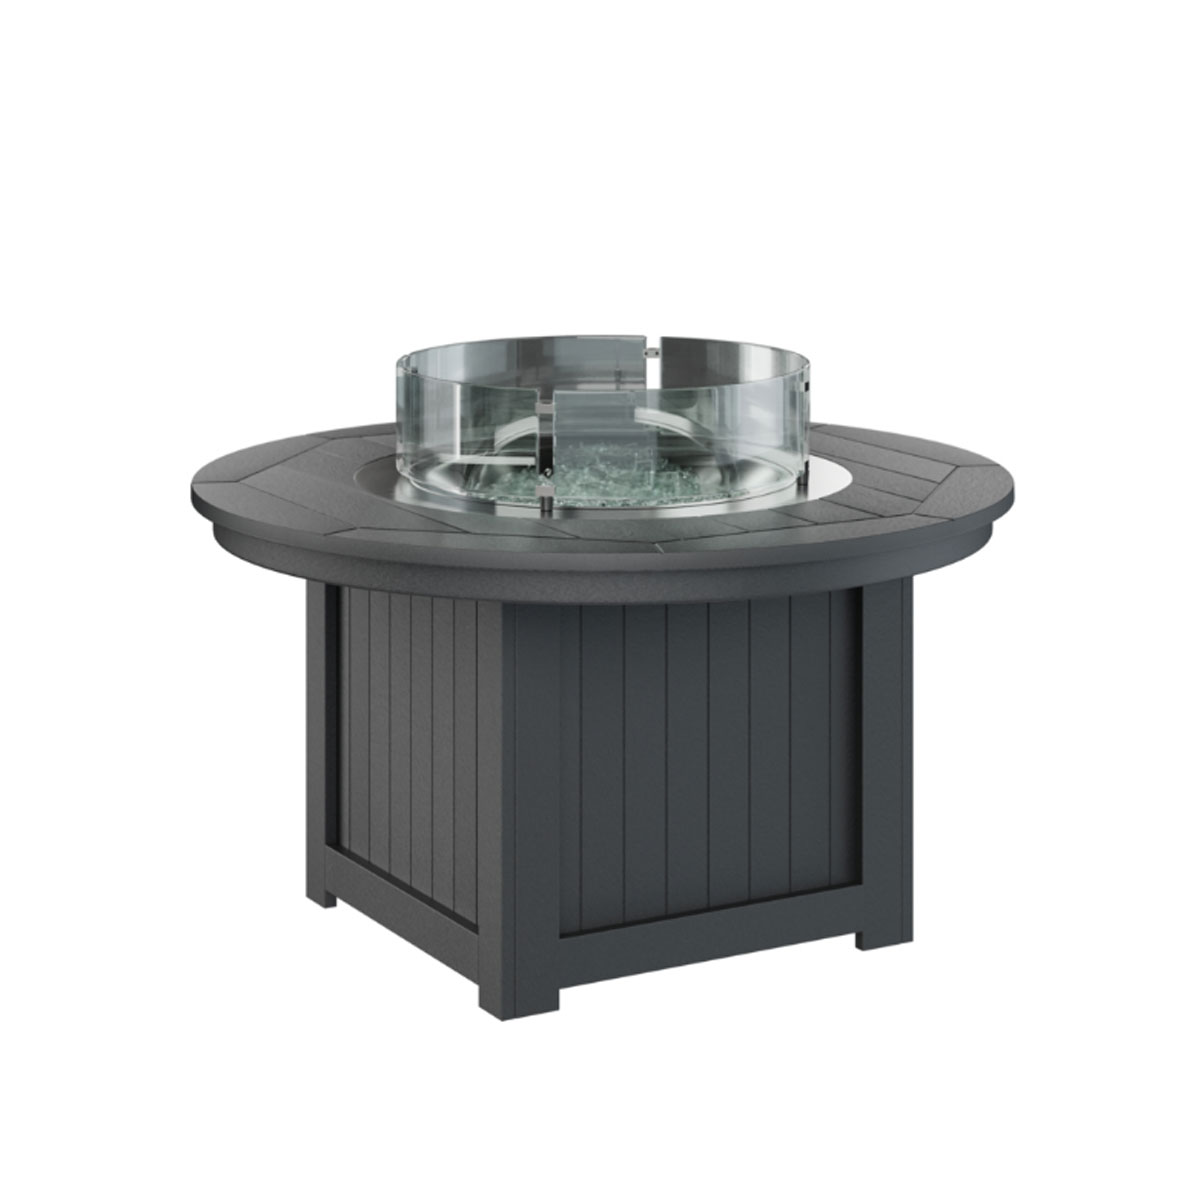 Donoma Poly-Top 44 inch Round Fire Pit